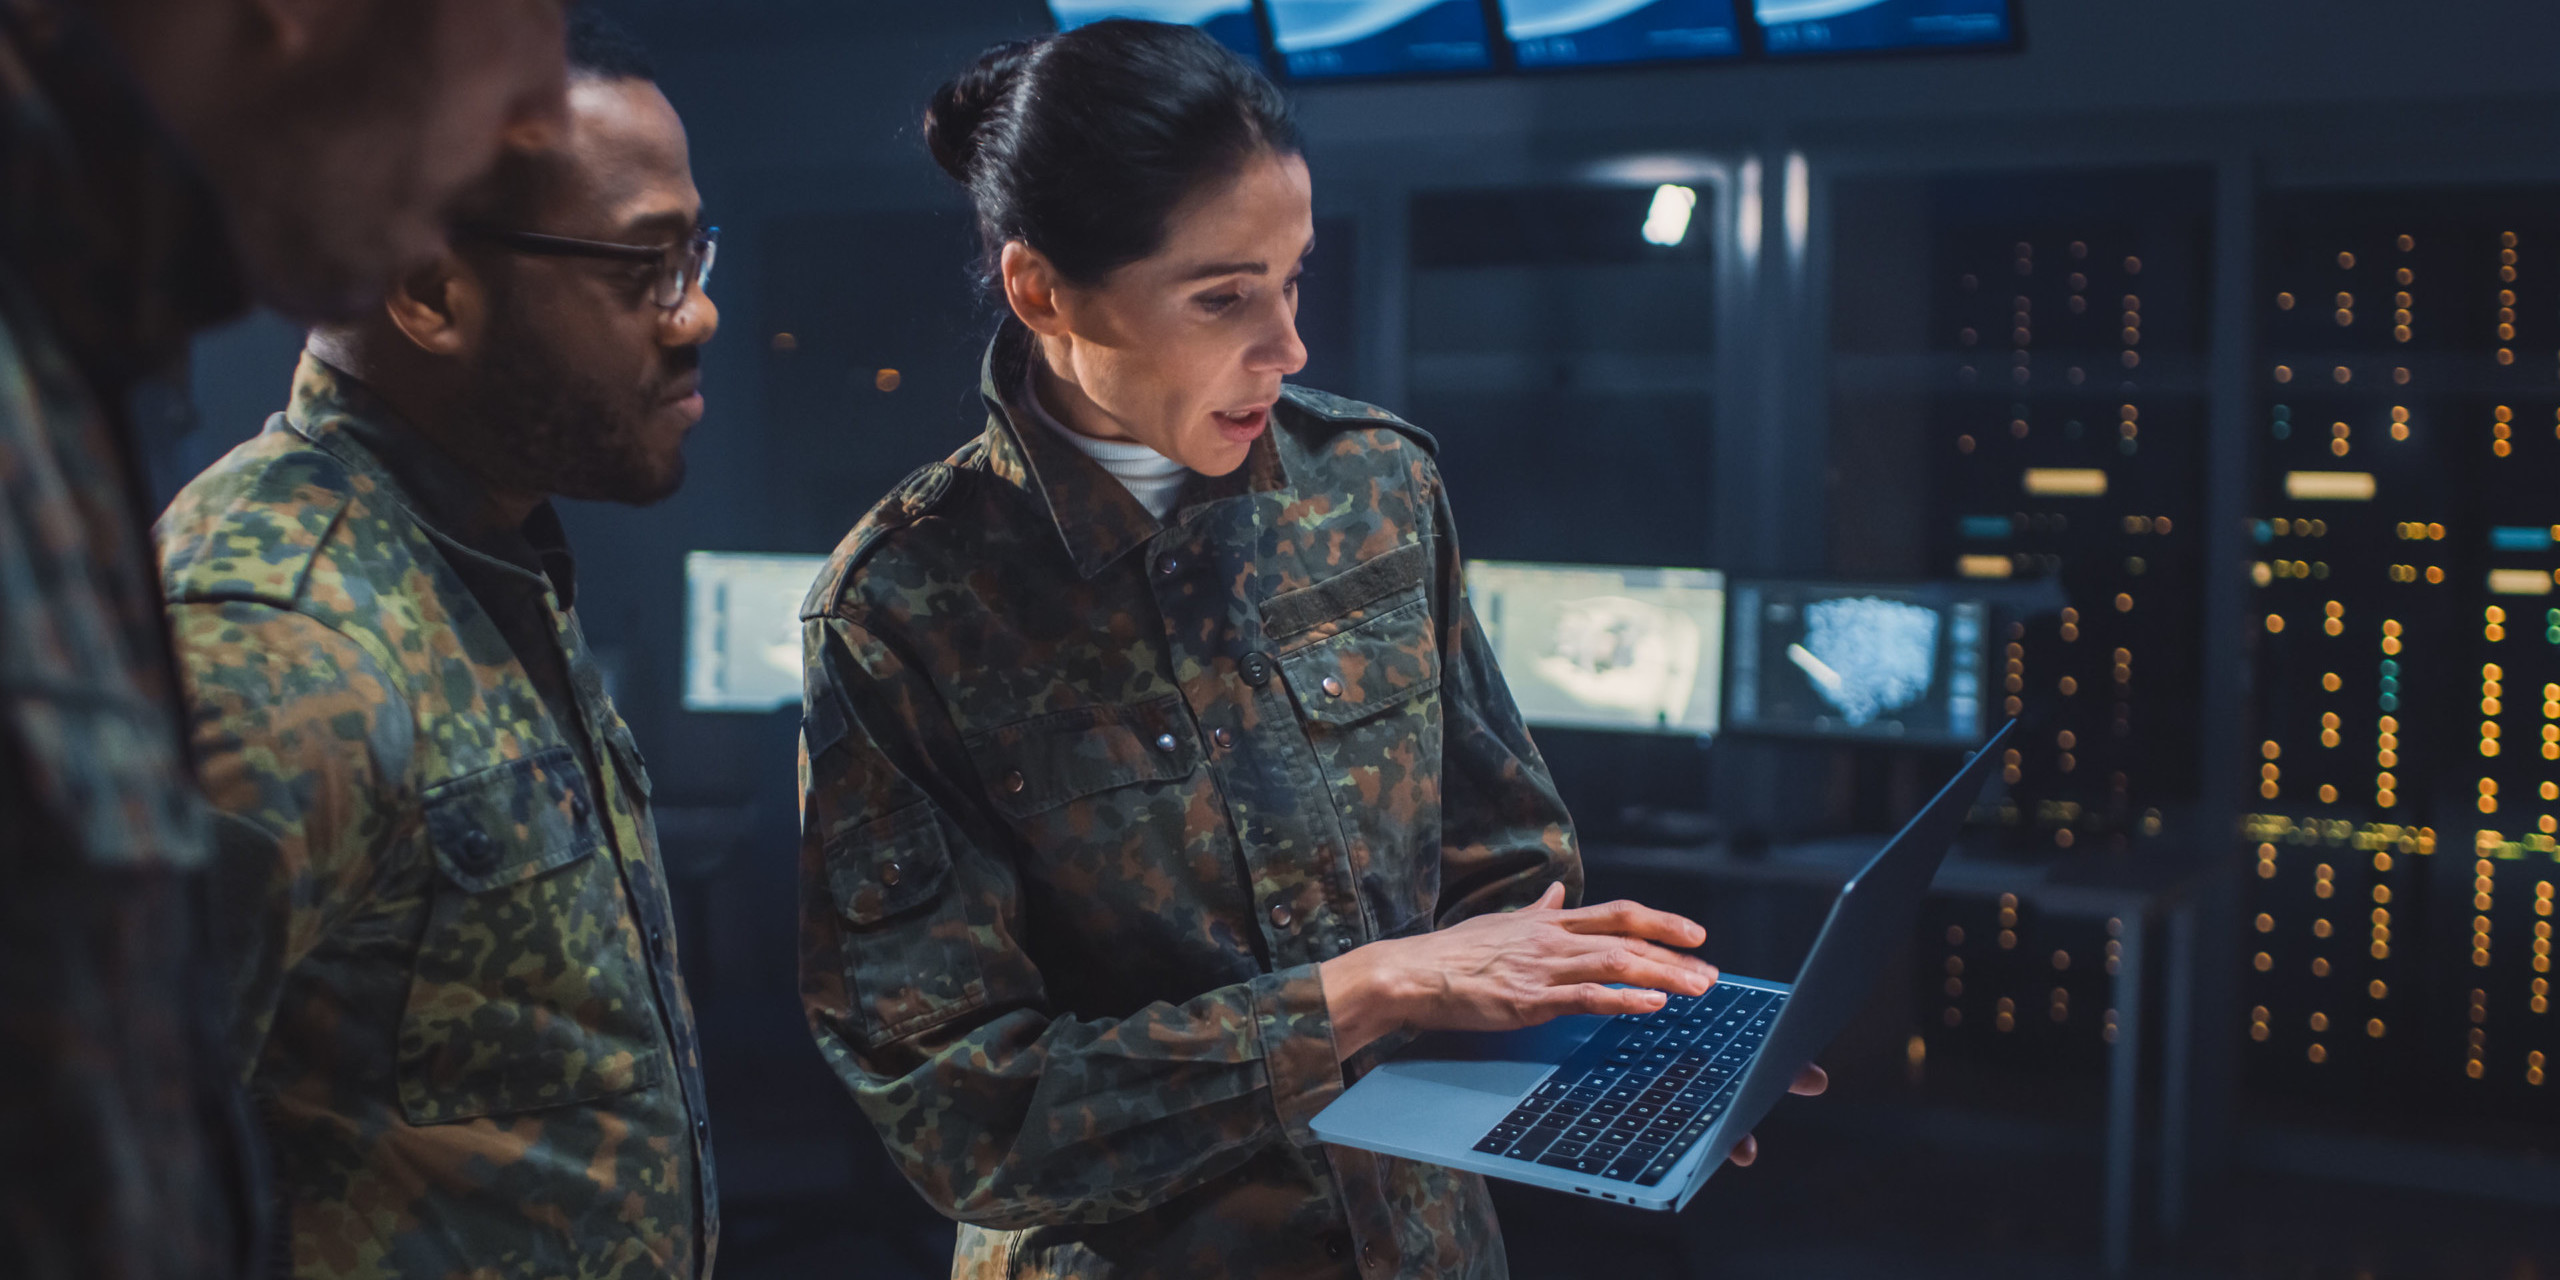 Cyber resilience demonstrated by female military officer to two male officers